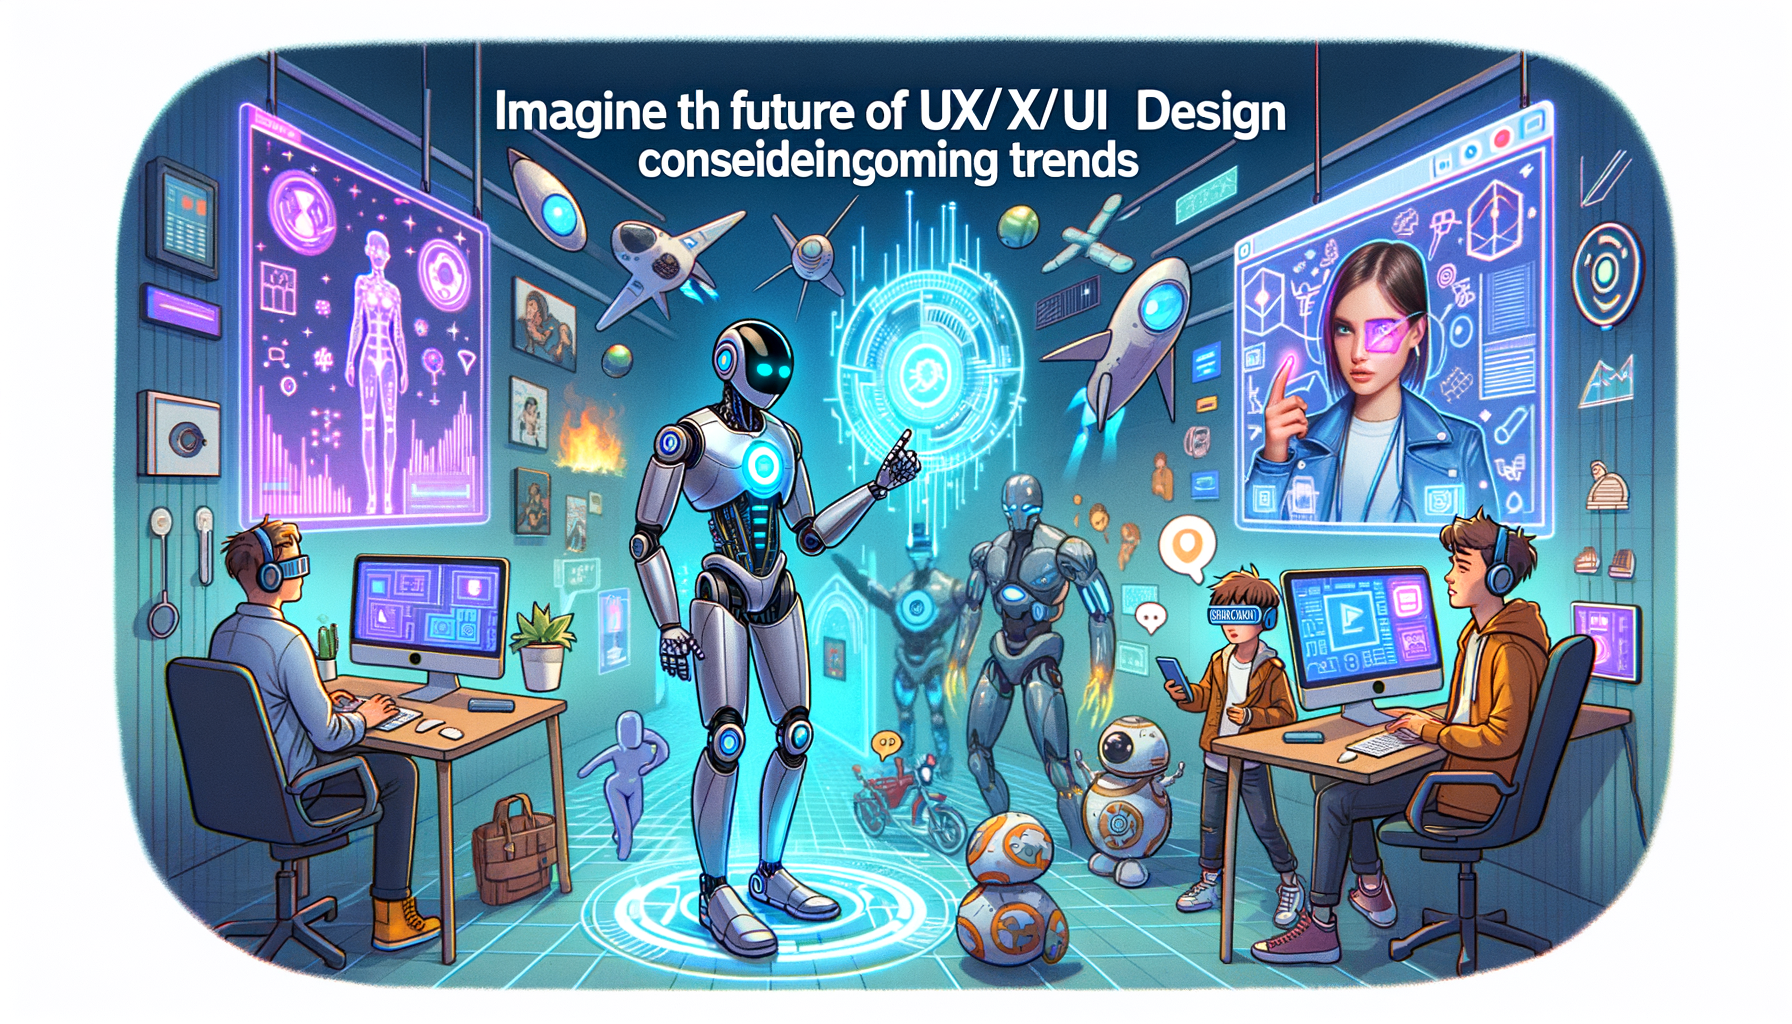 Exploring the Future of UX/UI Design: AI, VR/AR, and Personalization Trends